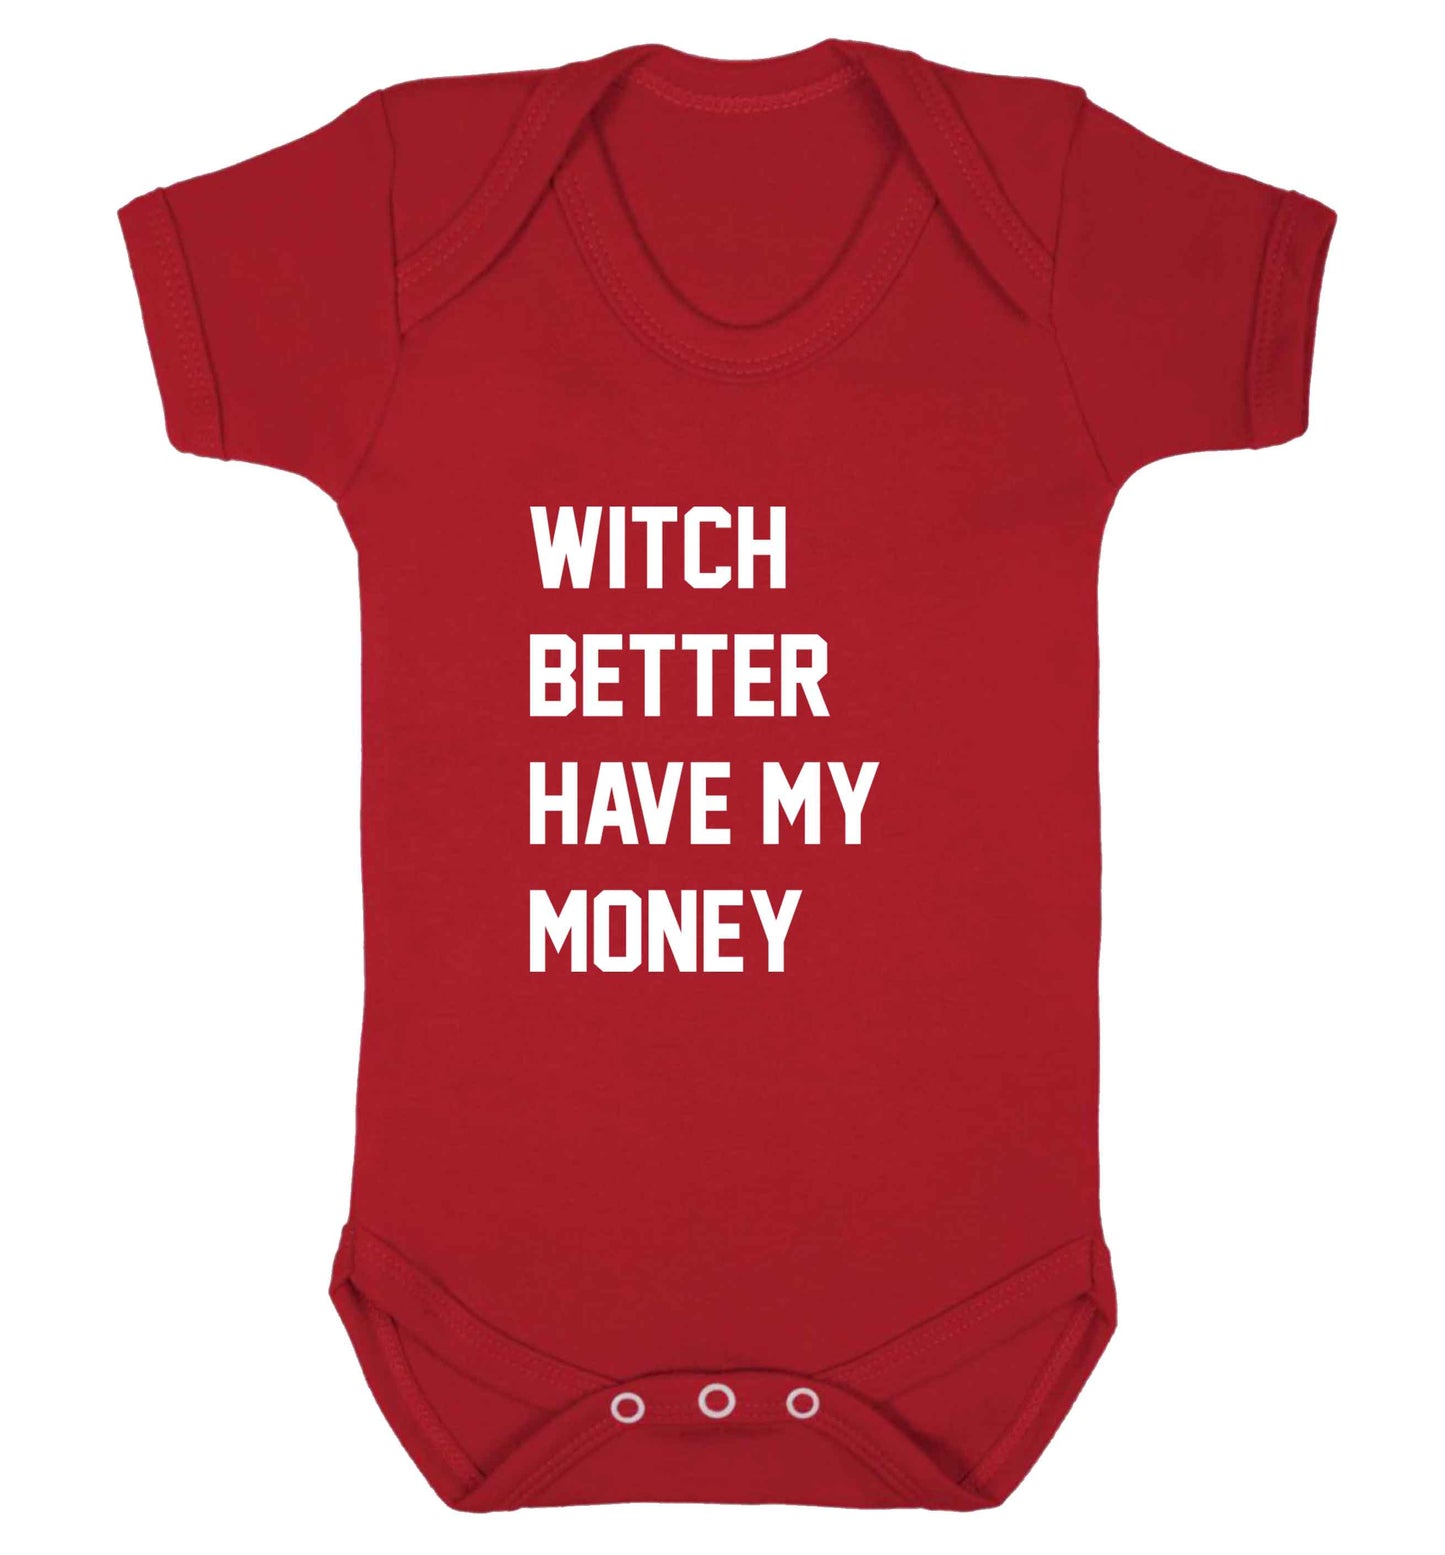 Witch better have my money baby vest red 18-24 months